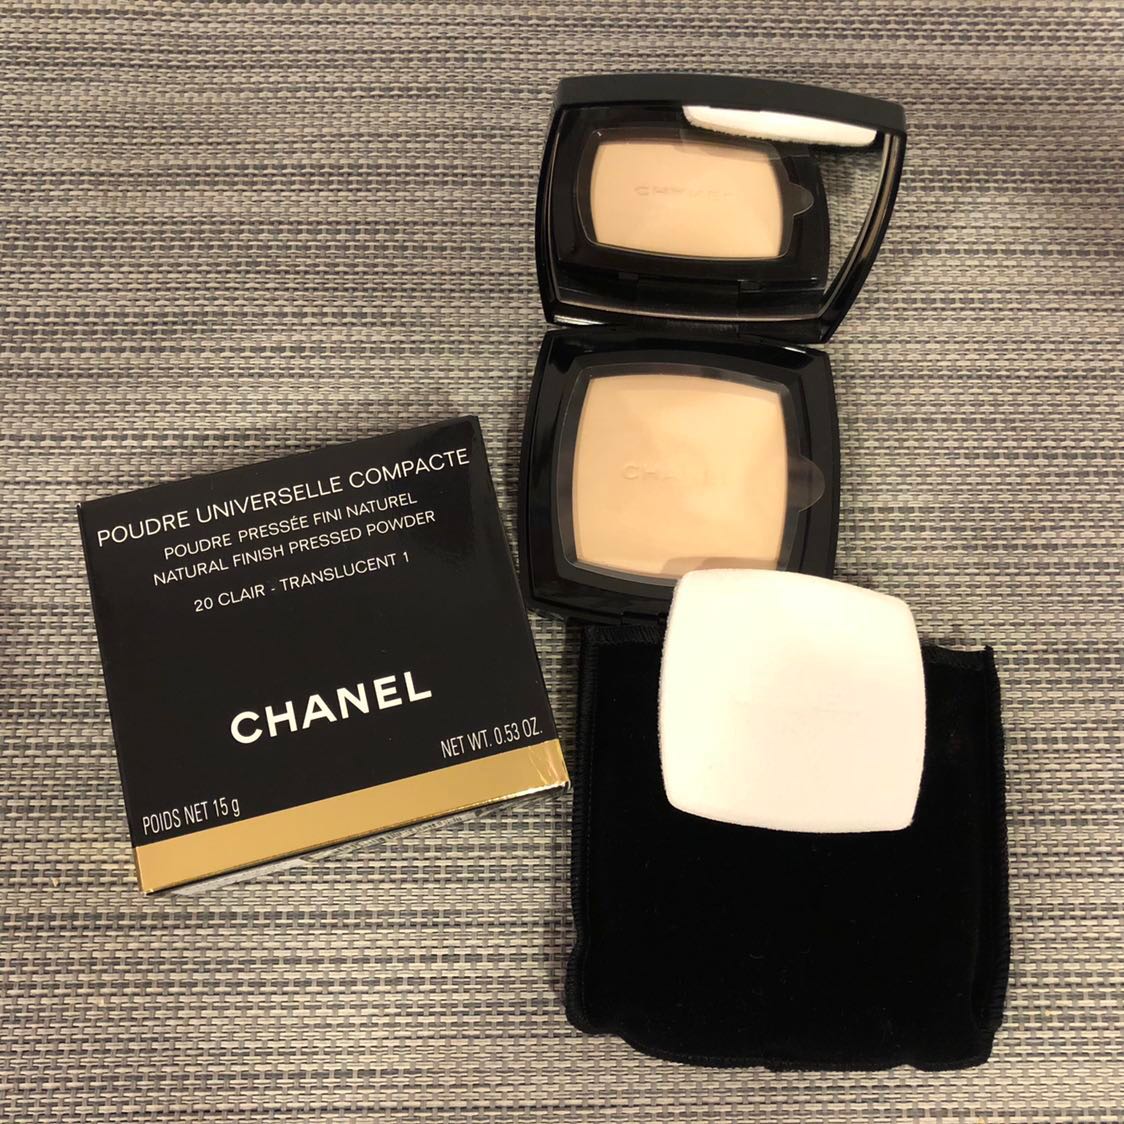 BRAND A  B  C D  E F  G  CHANEL  Chanel Poudre Universelle Compacte Natural  Finish Pressed Powder  wwwfadhassbeautycom  SOFTLENS  SKINCARE   FASHION  BODY CARE  BEAUTY TOOLS